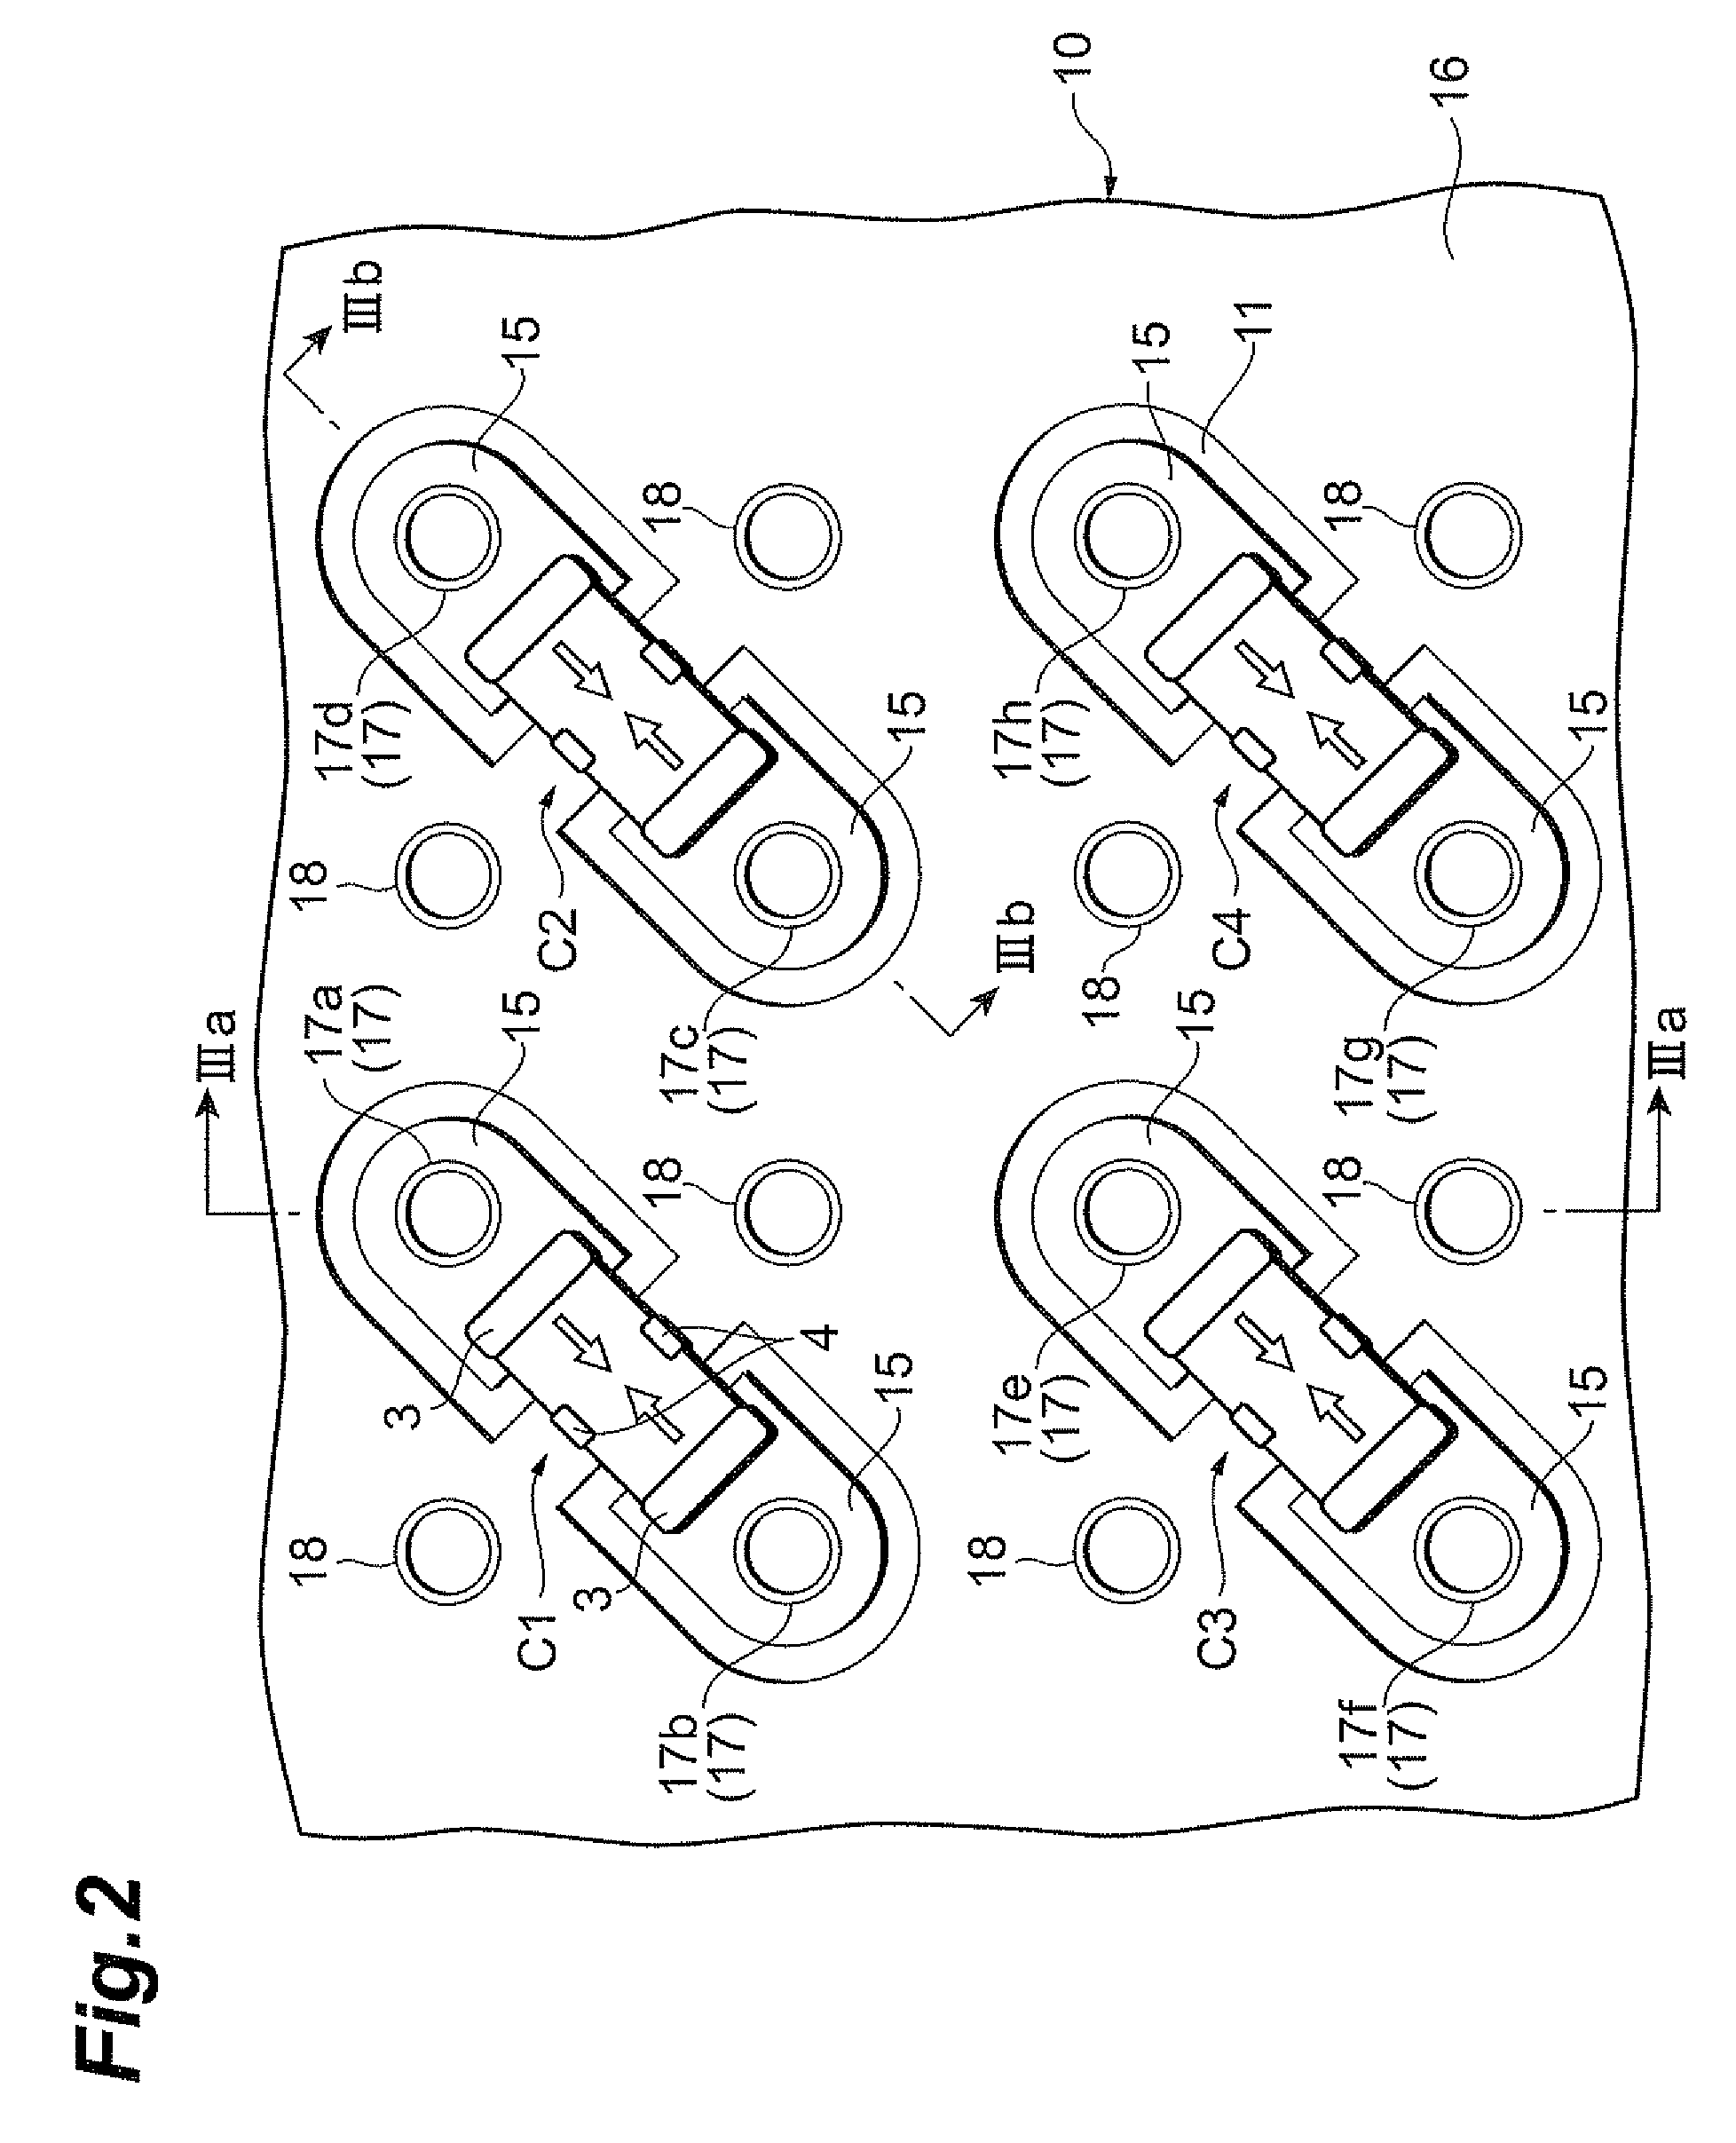 Feedthrough capacitor mounted structure